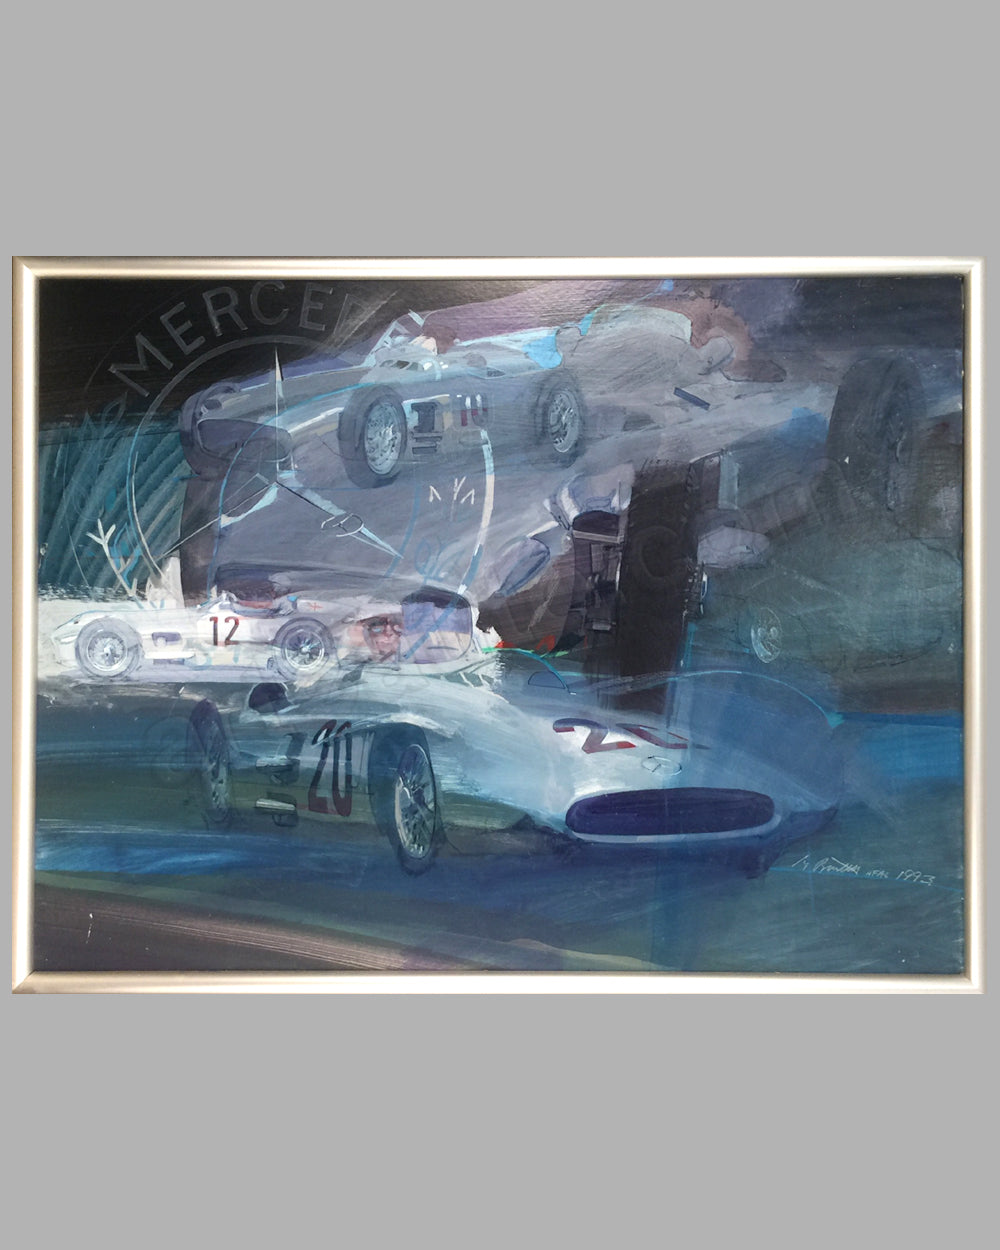 Mercedes-Benz Grand Prix Cars painting by George Bartell, 1993